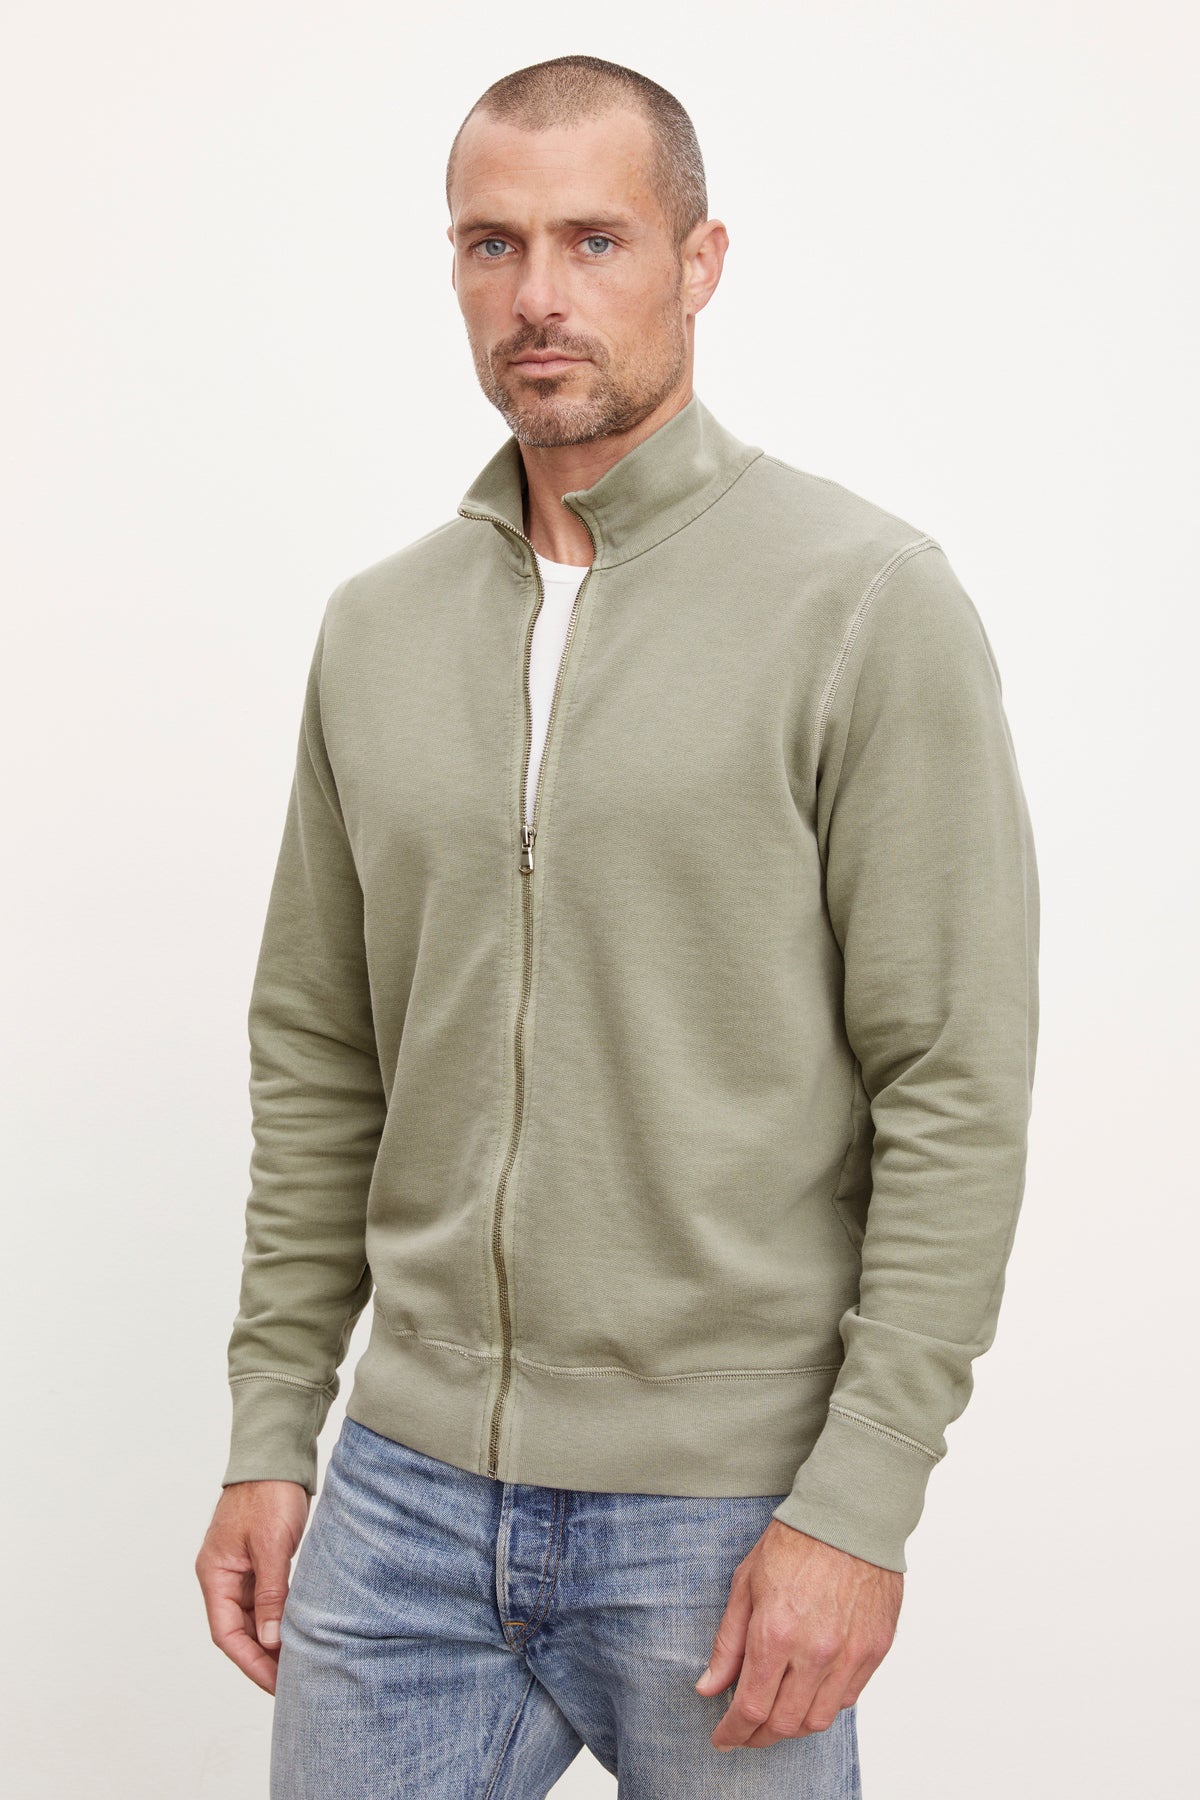 A man wearing a green Velvet by Graham & Spencer TERRY FRENCH TERRY FULL-ZIP sweatshirt and jeans.-36008992735425